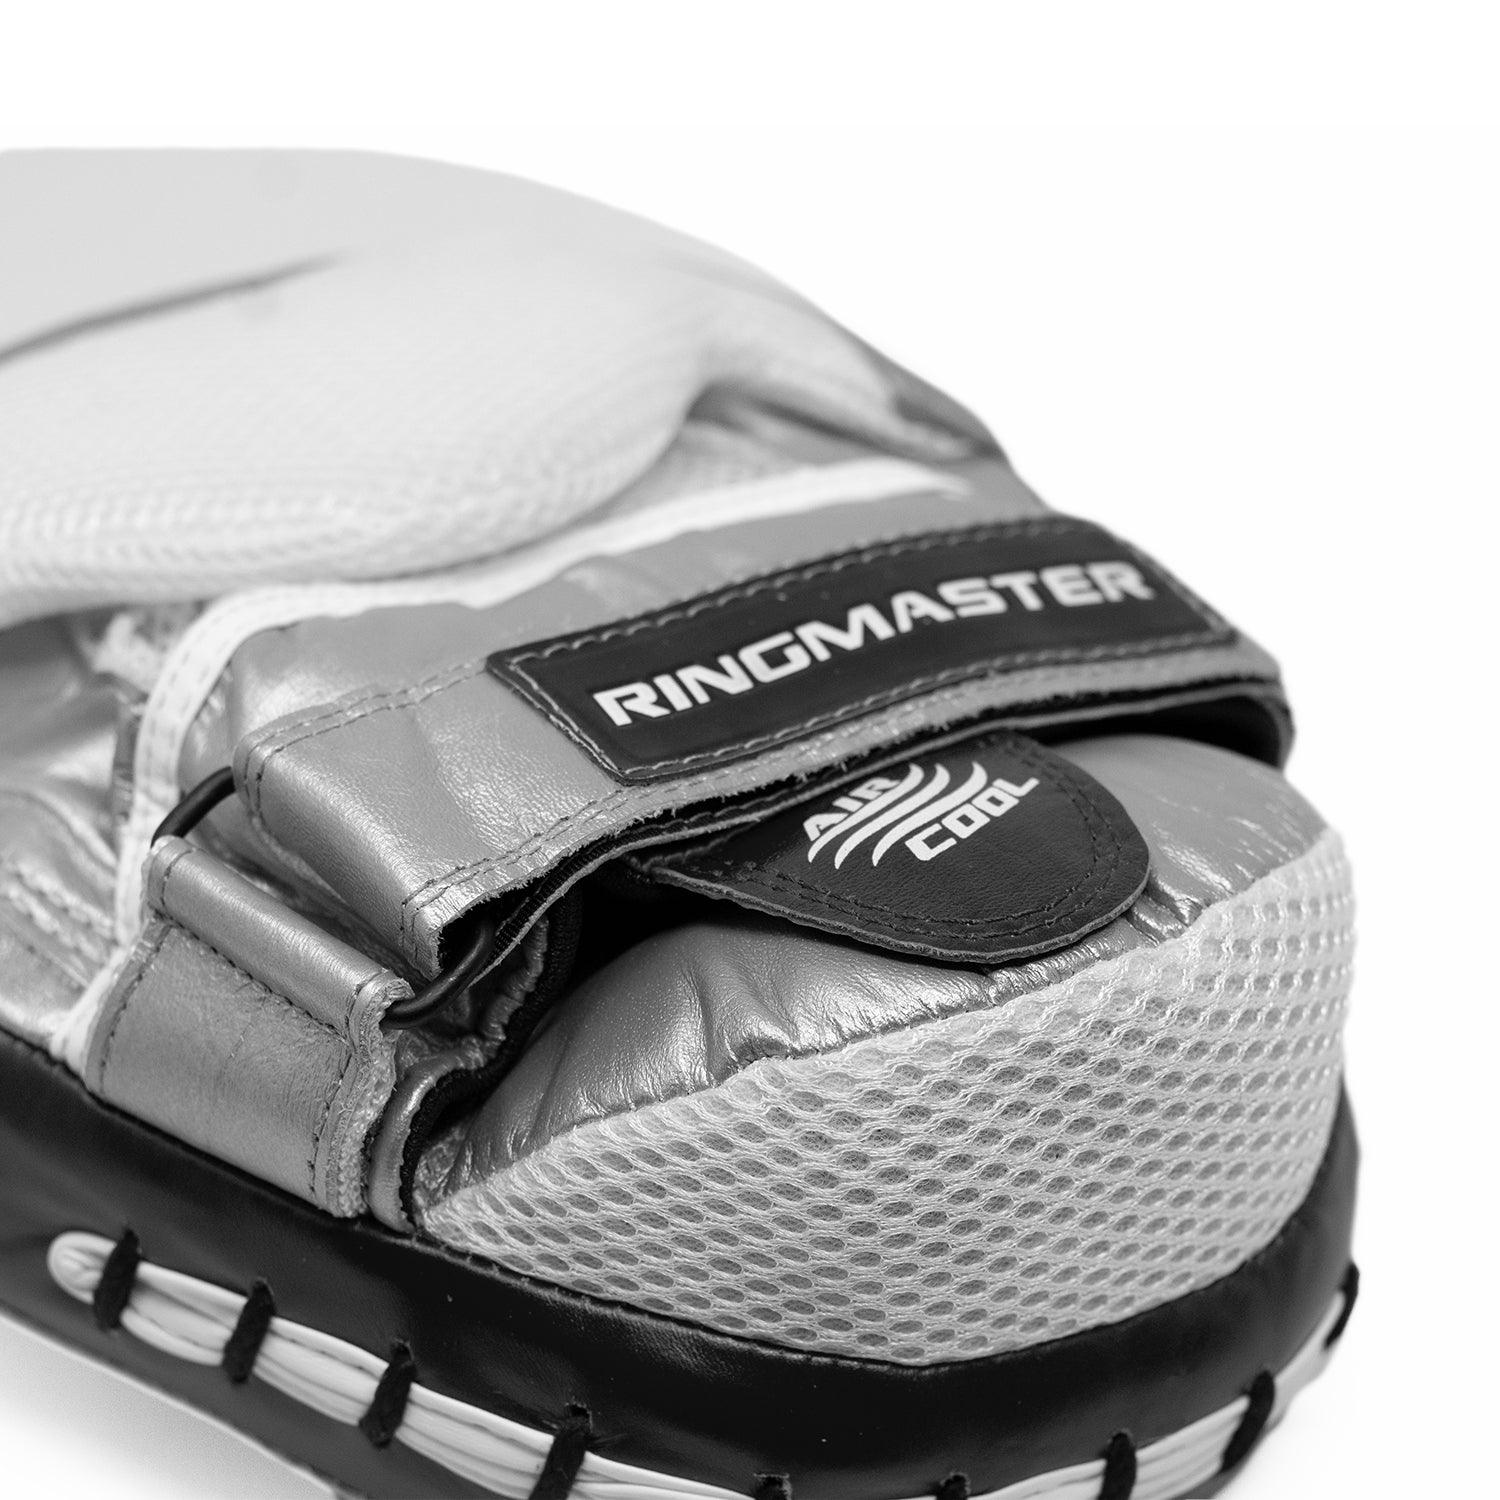 RingMaster Sports Focus pads Genuine Leather PGL 3.0 Black and White image 3